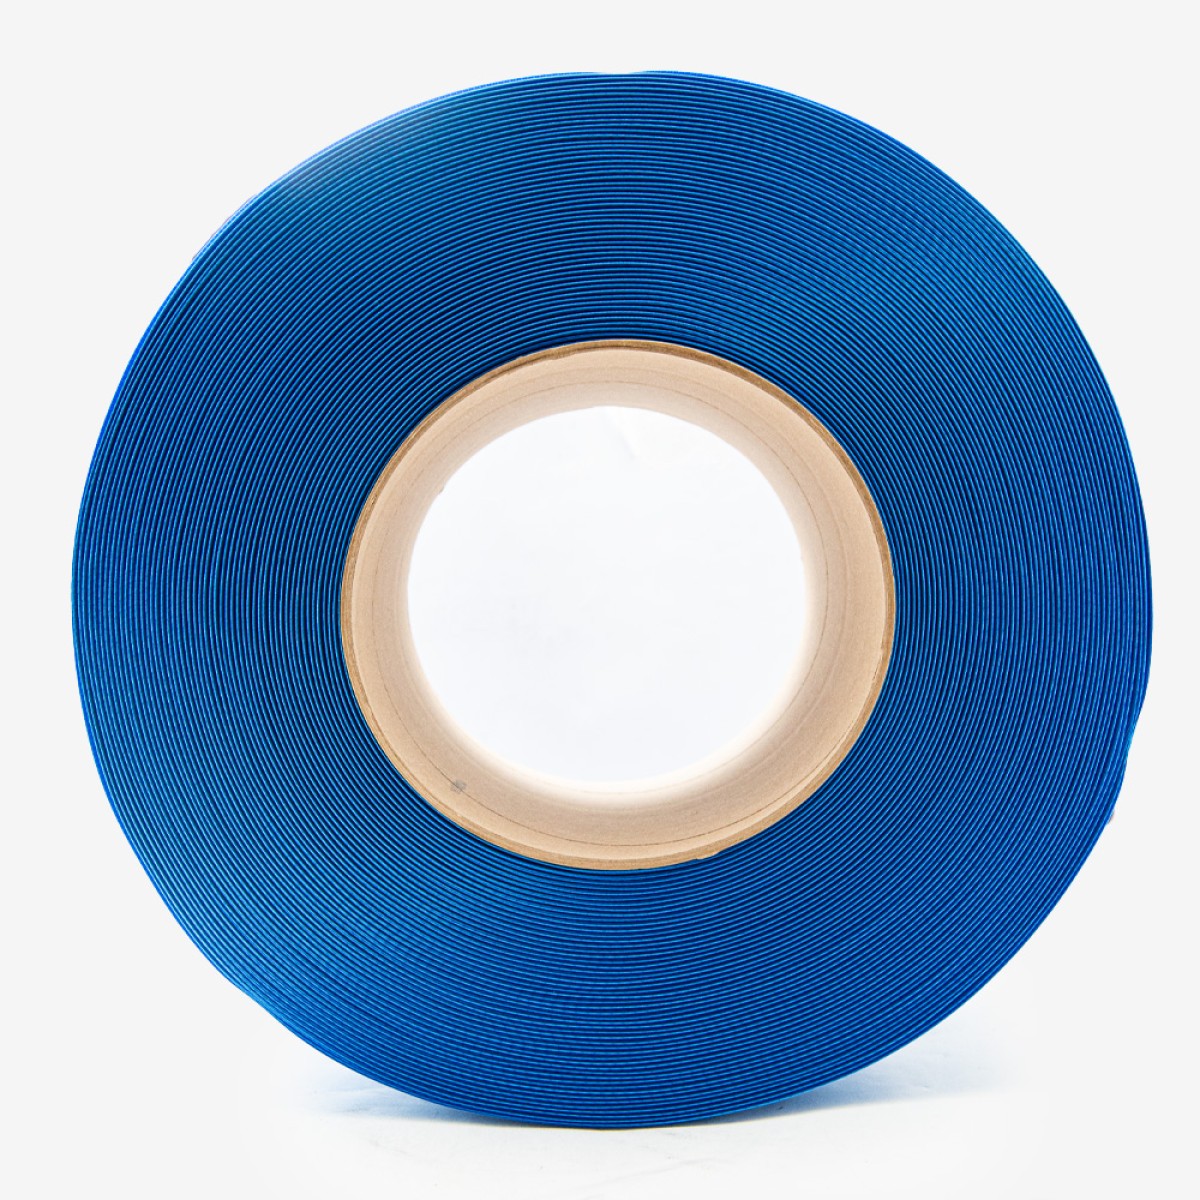 IKON STRAPPING TAPE 12mm x 3000mtr BLUE